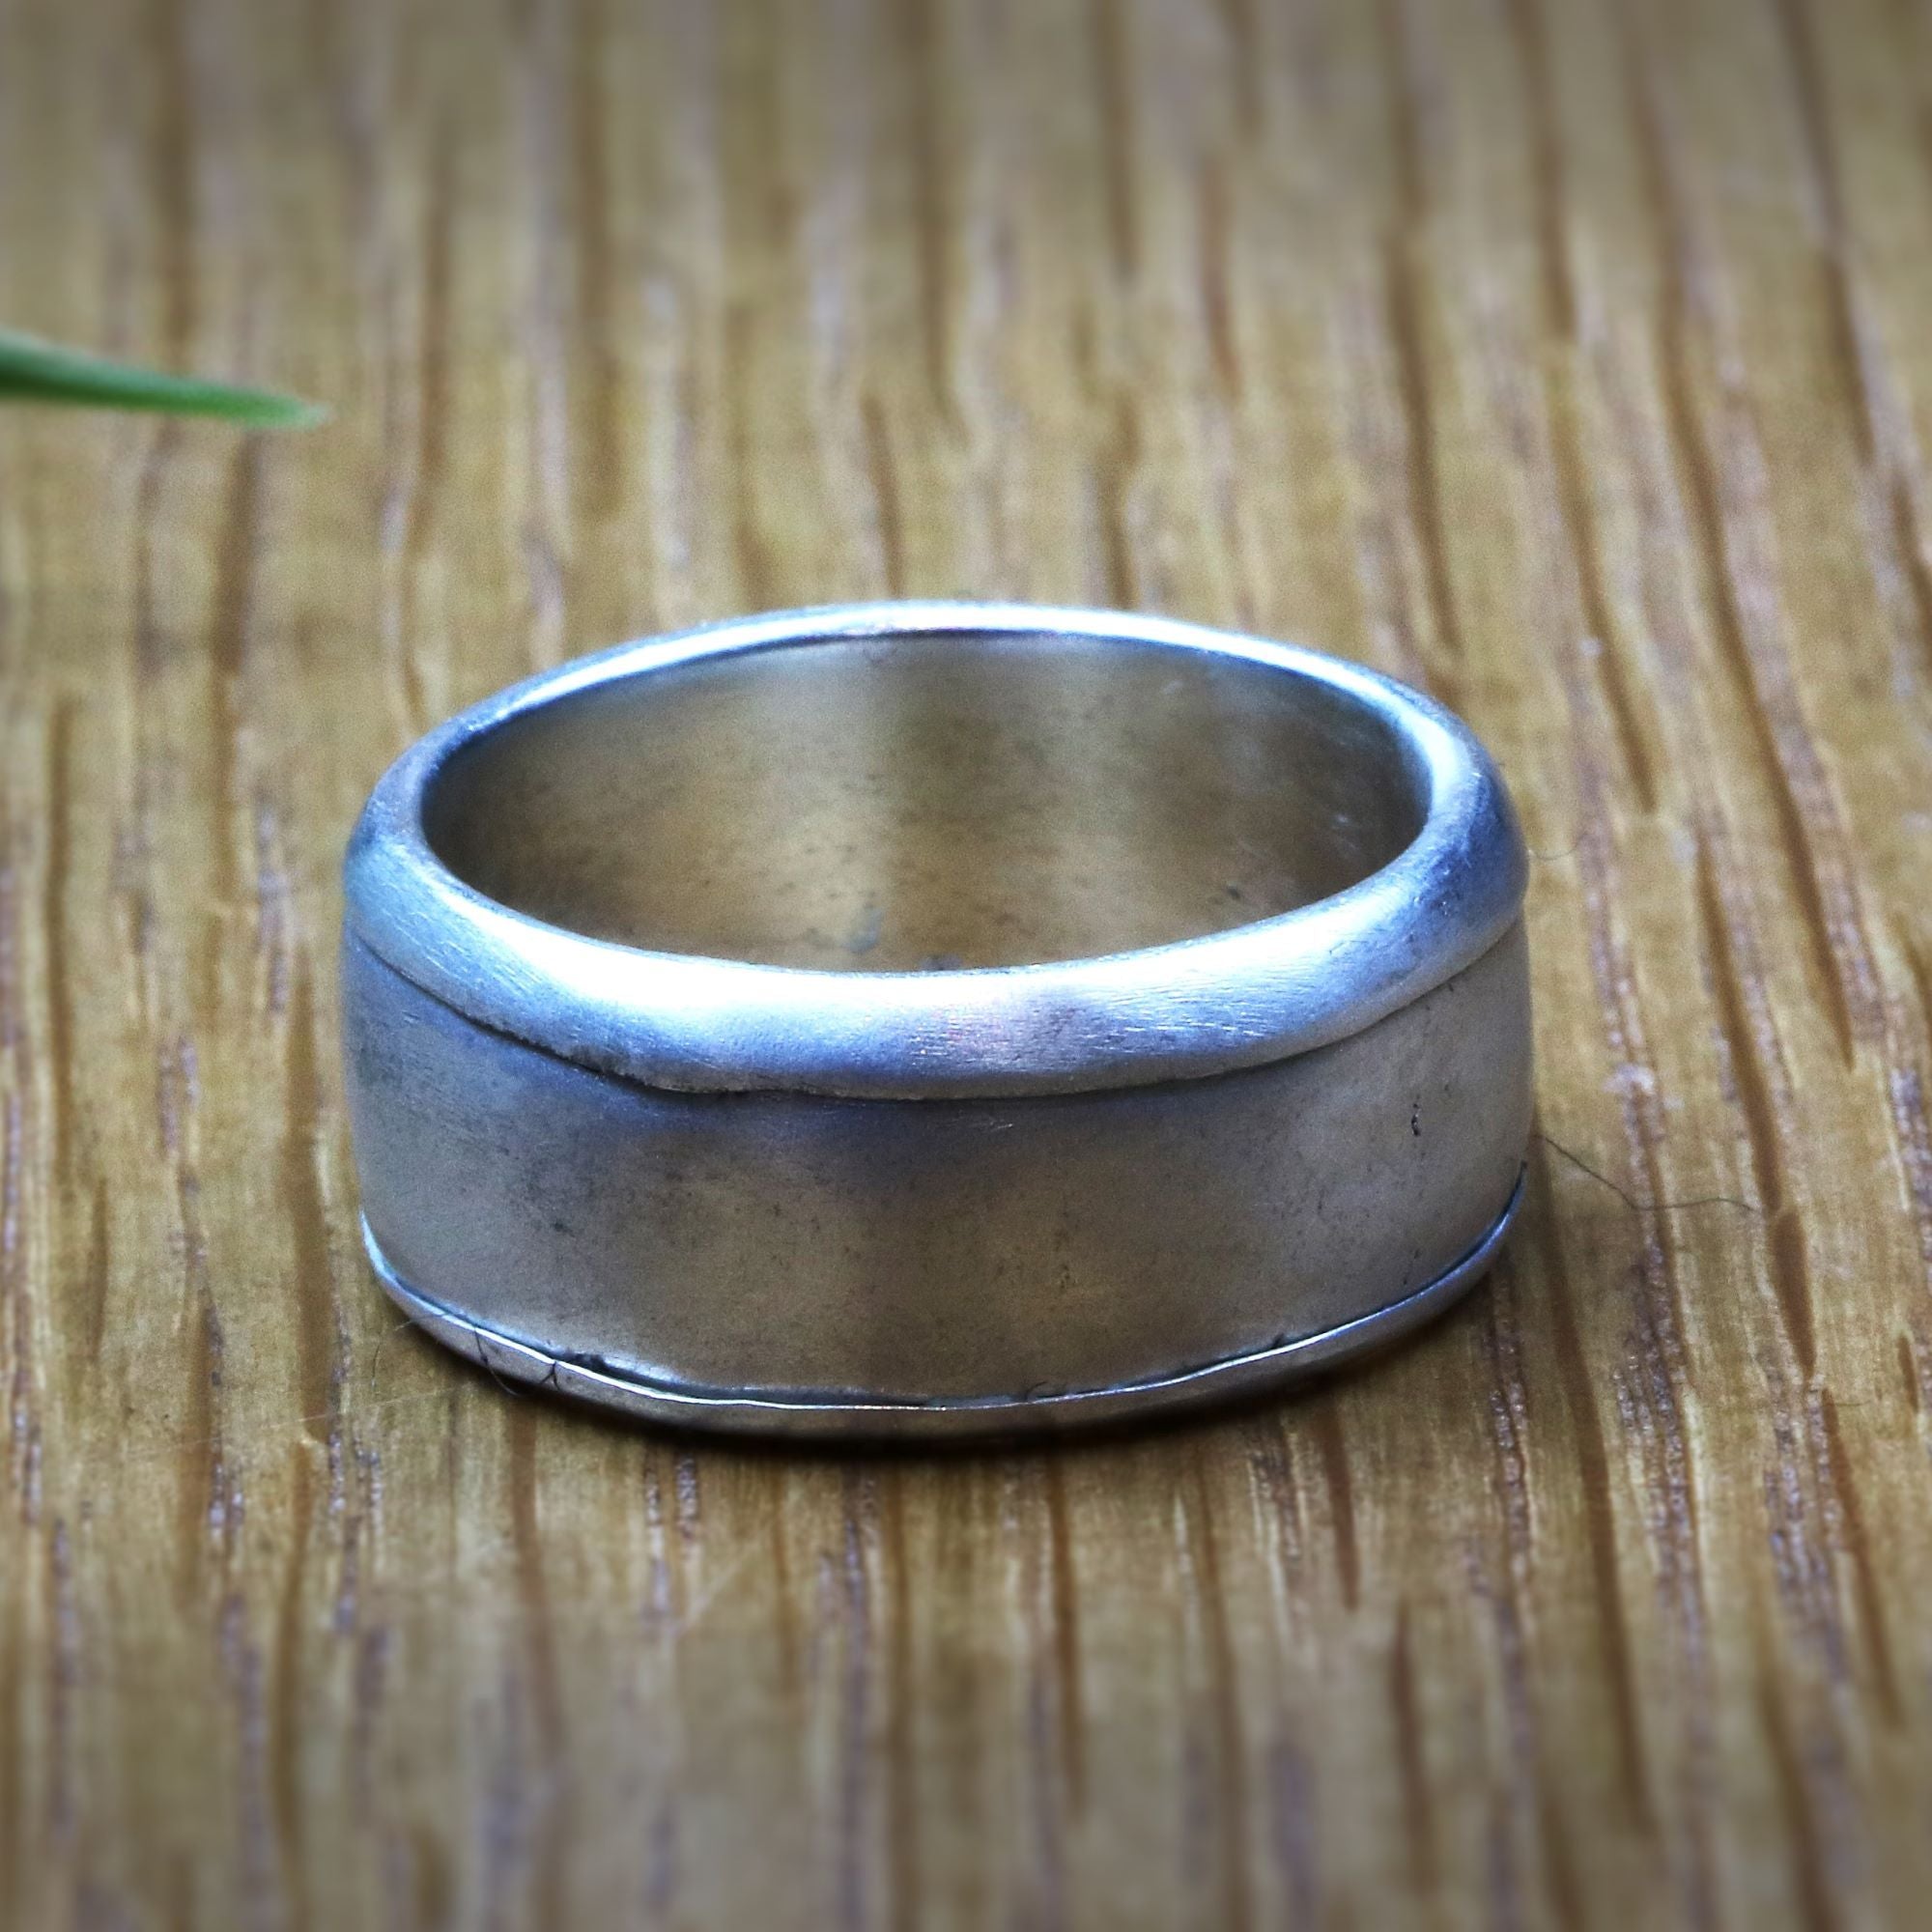 2-Tone Black & Polished Stainless Steel Ring. Wholesale -  Kingscrossjewelry.com